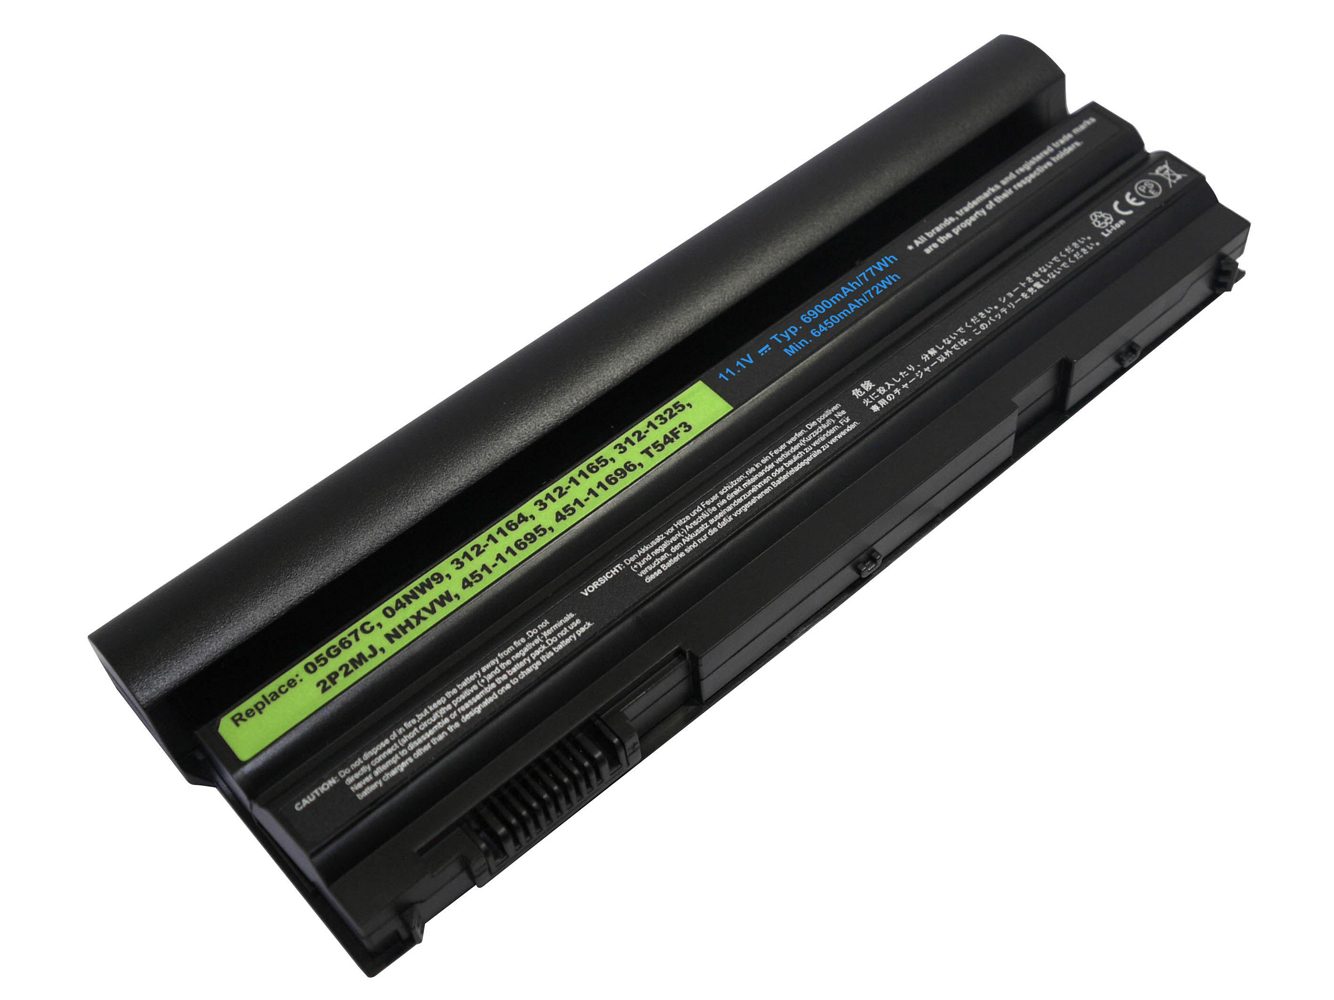 04NW9, 05G67C replacement Laptop Battery for Dell Latitude E5420, Latitude E5420 ATG, 9 cells, 6900mAh, 11.10V